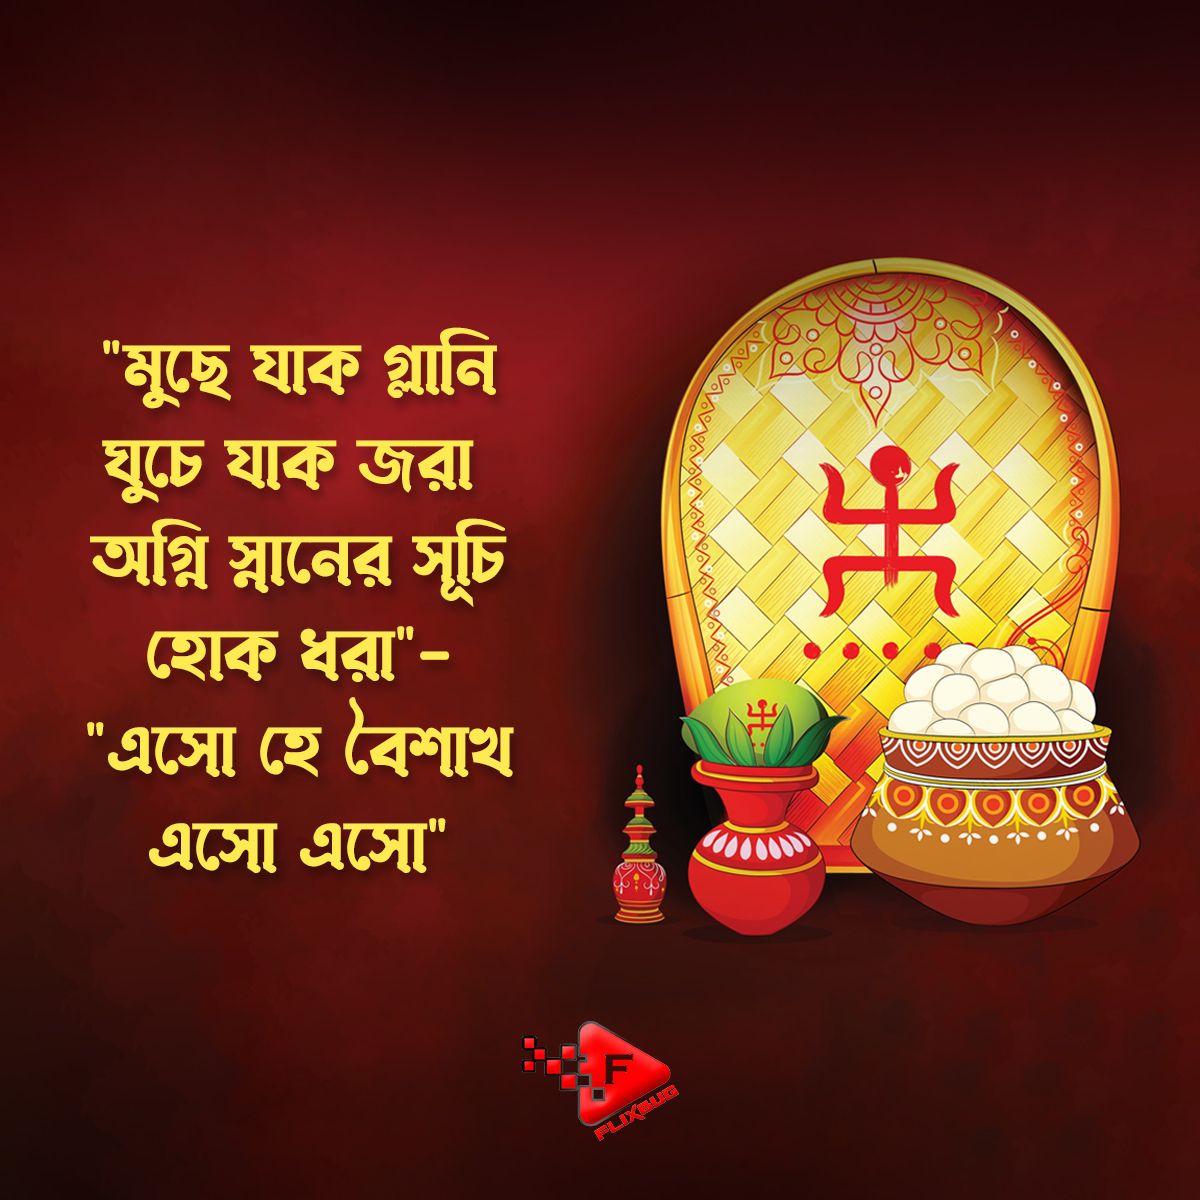 May the sweetness of sandesh and the warmth of the sun bring happiness and prosperity in everyone's lives on this auspicious occasion of Poila Boisakh. 

#poilaboishak #poilaboisakh2024 #poilaboishakhspecial #poilaboishakhspecial❤️ #Flixbug #Flixbugott